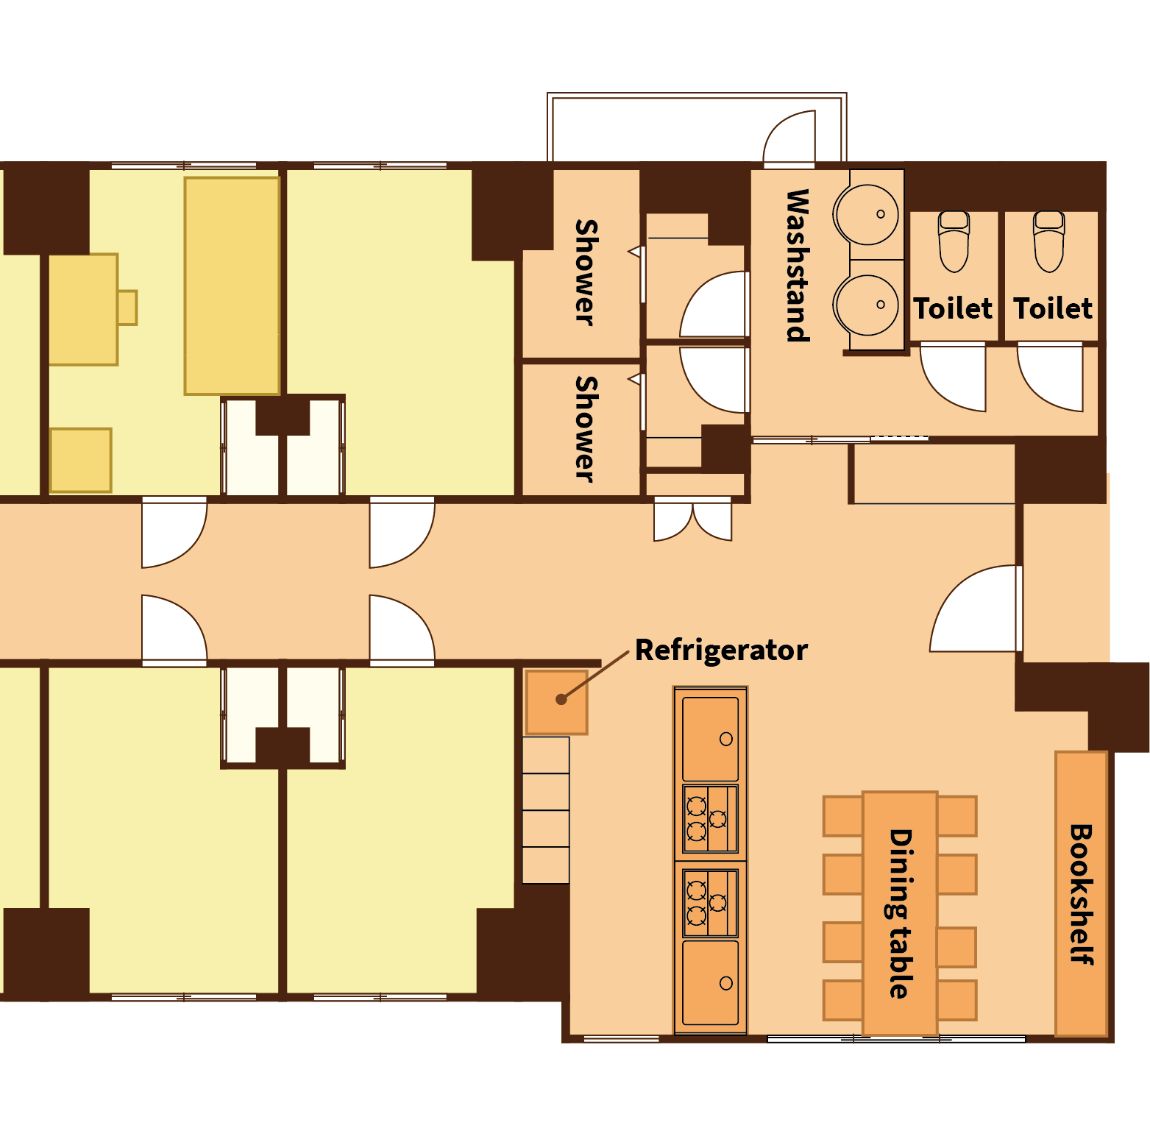 Zoomed floor plan of the share unit type